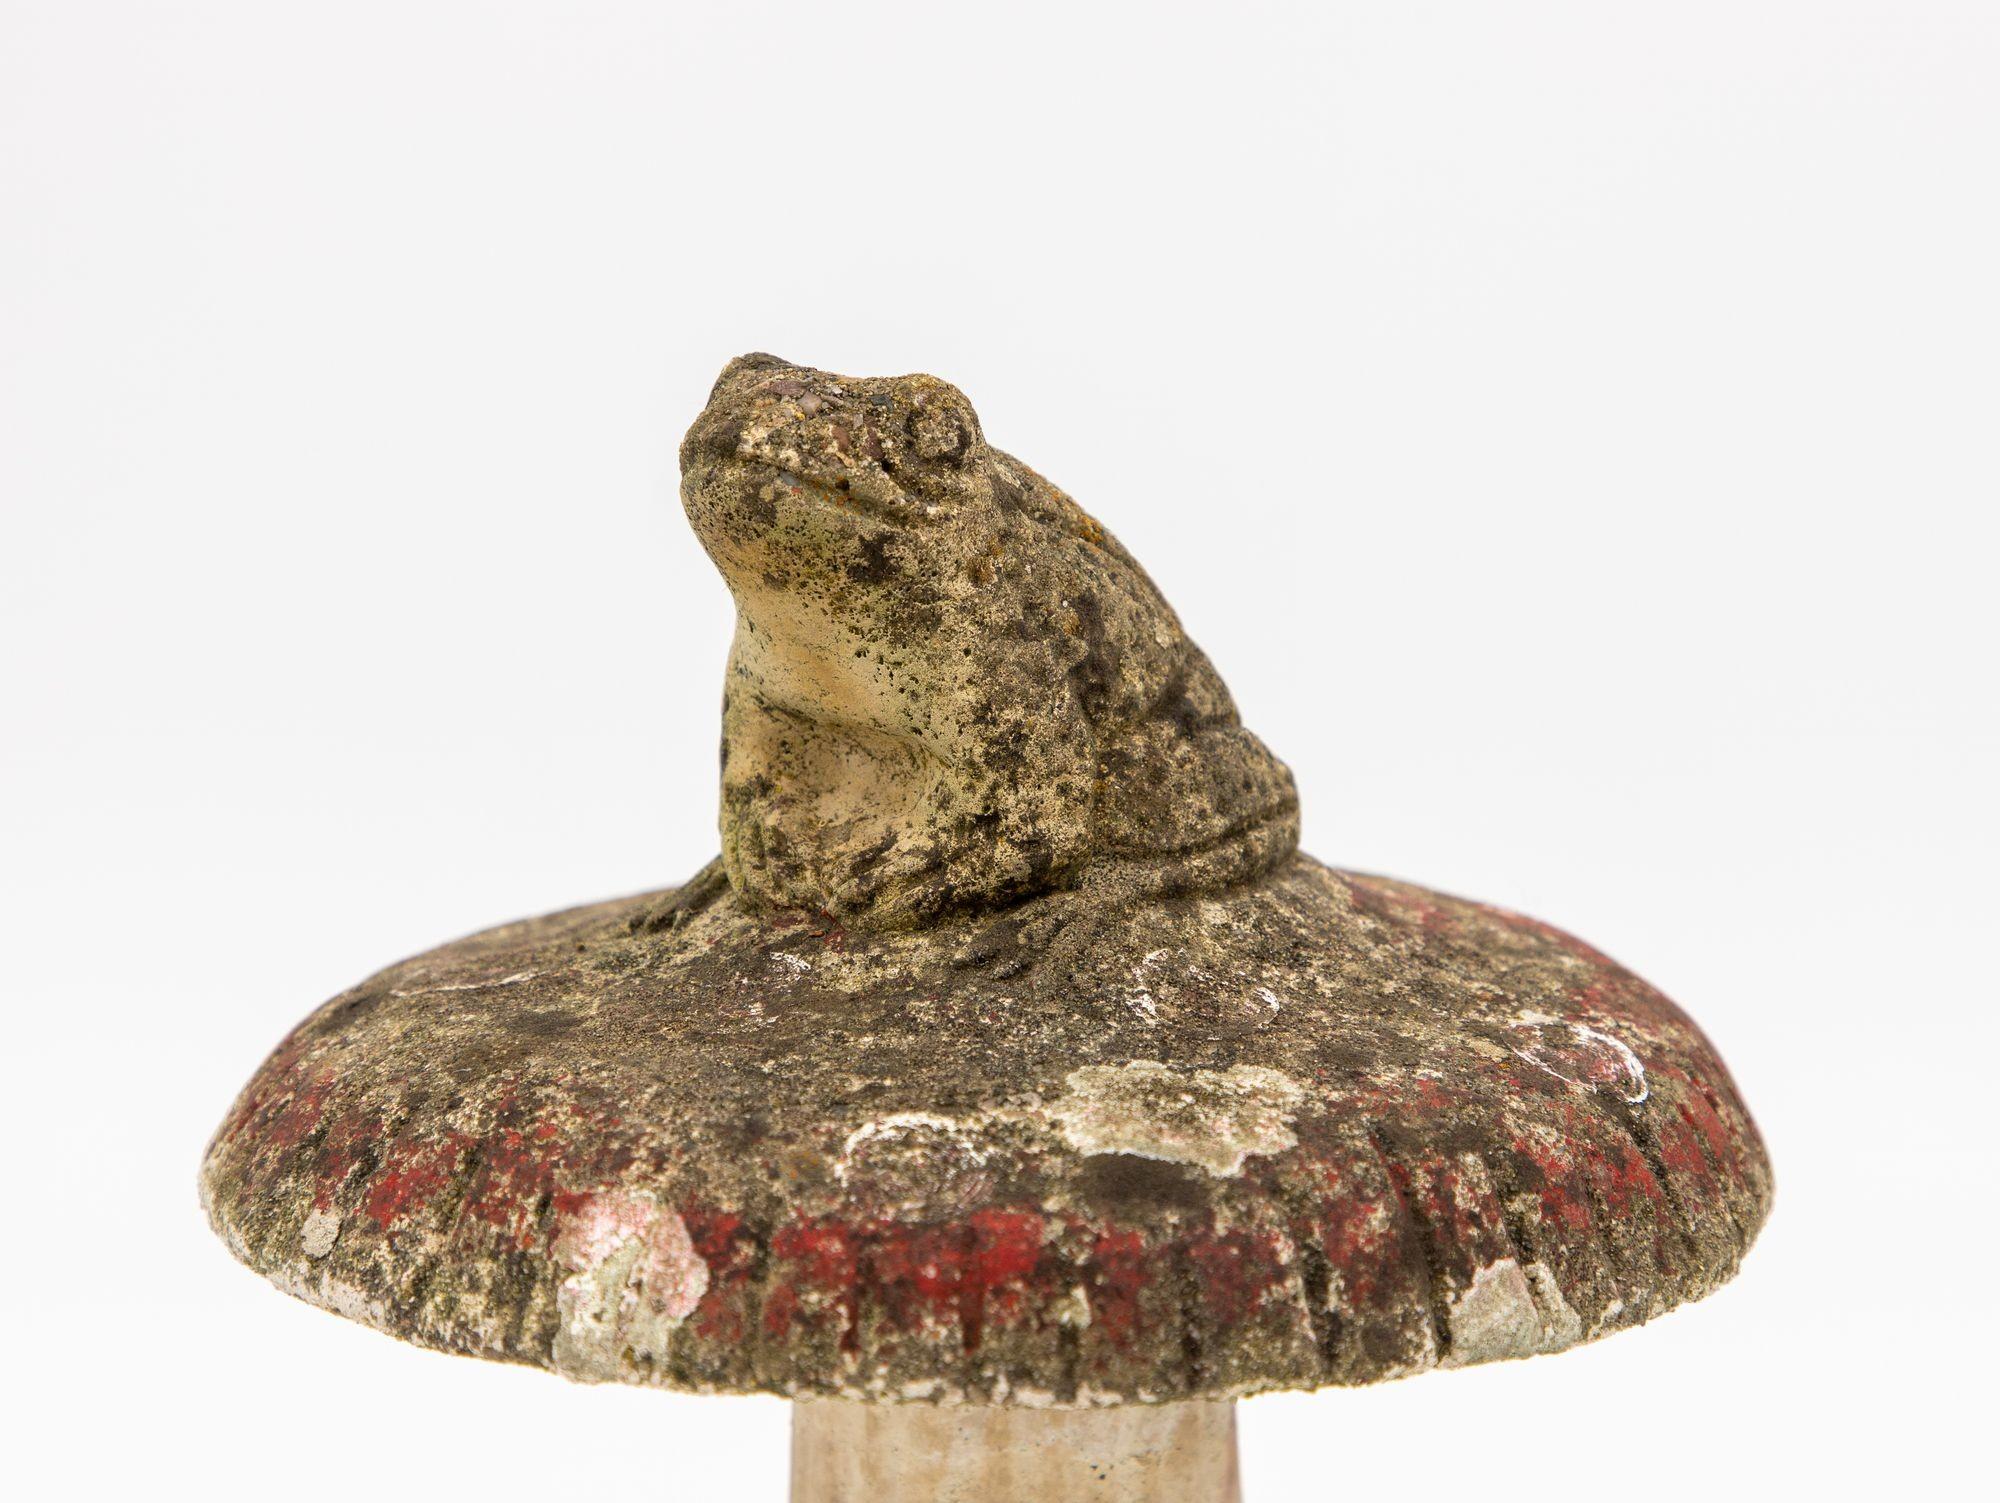 This charming cast stone toad garden ornament adds a touch of whimsy and delight to your outdoor decor. This ornament features a lifelike toad sitting on a toadstool, crafted with intricate details and a realistic expression, and retains some of its